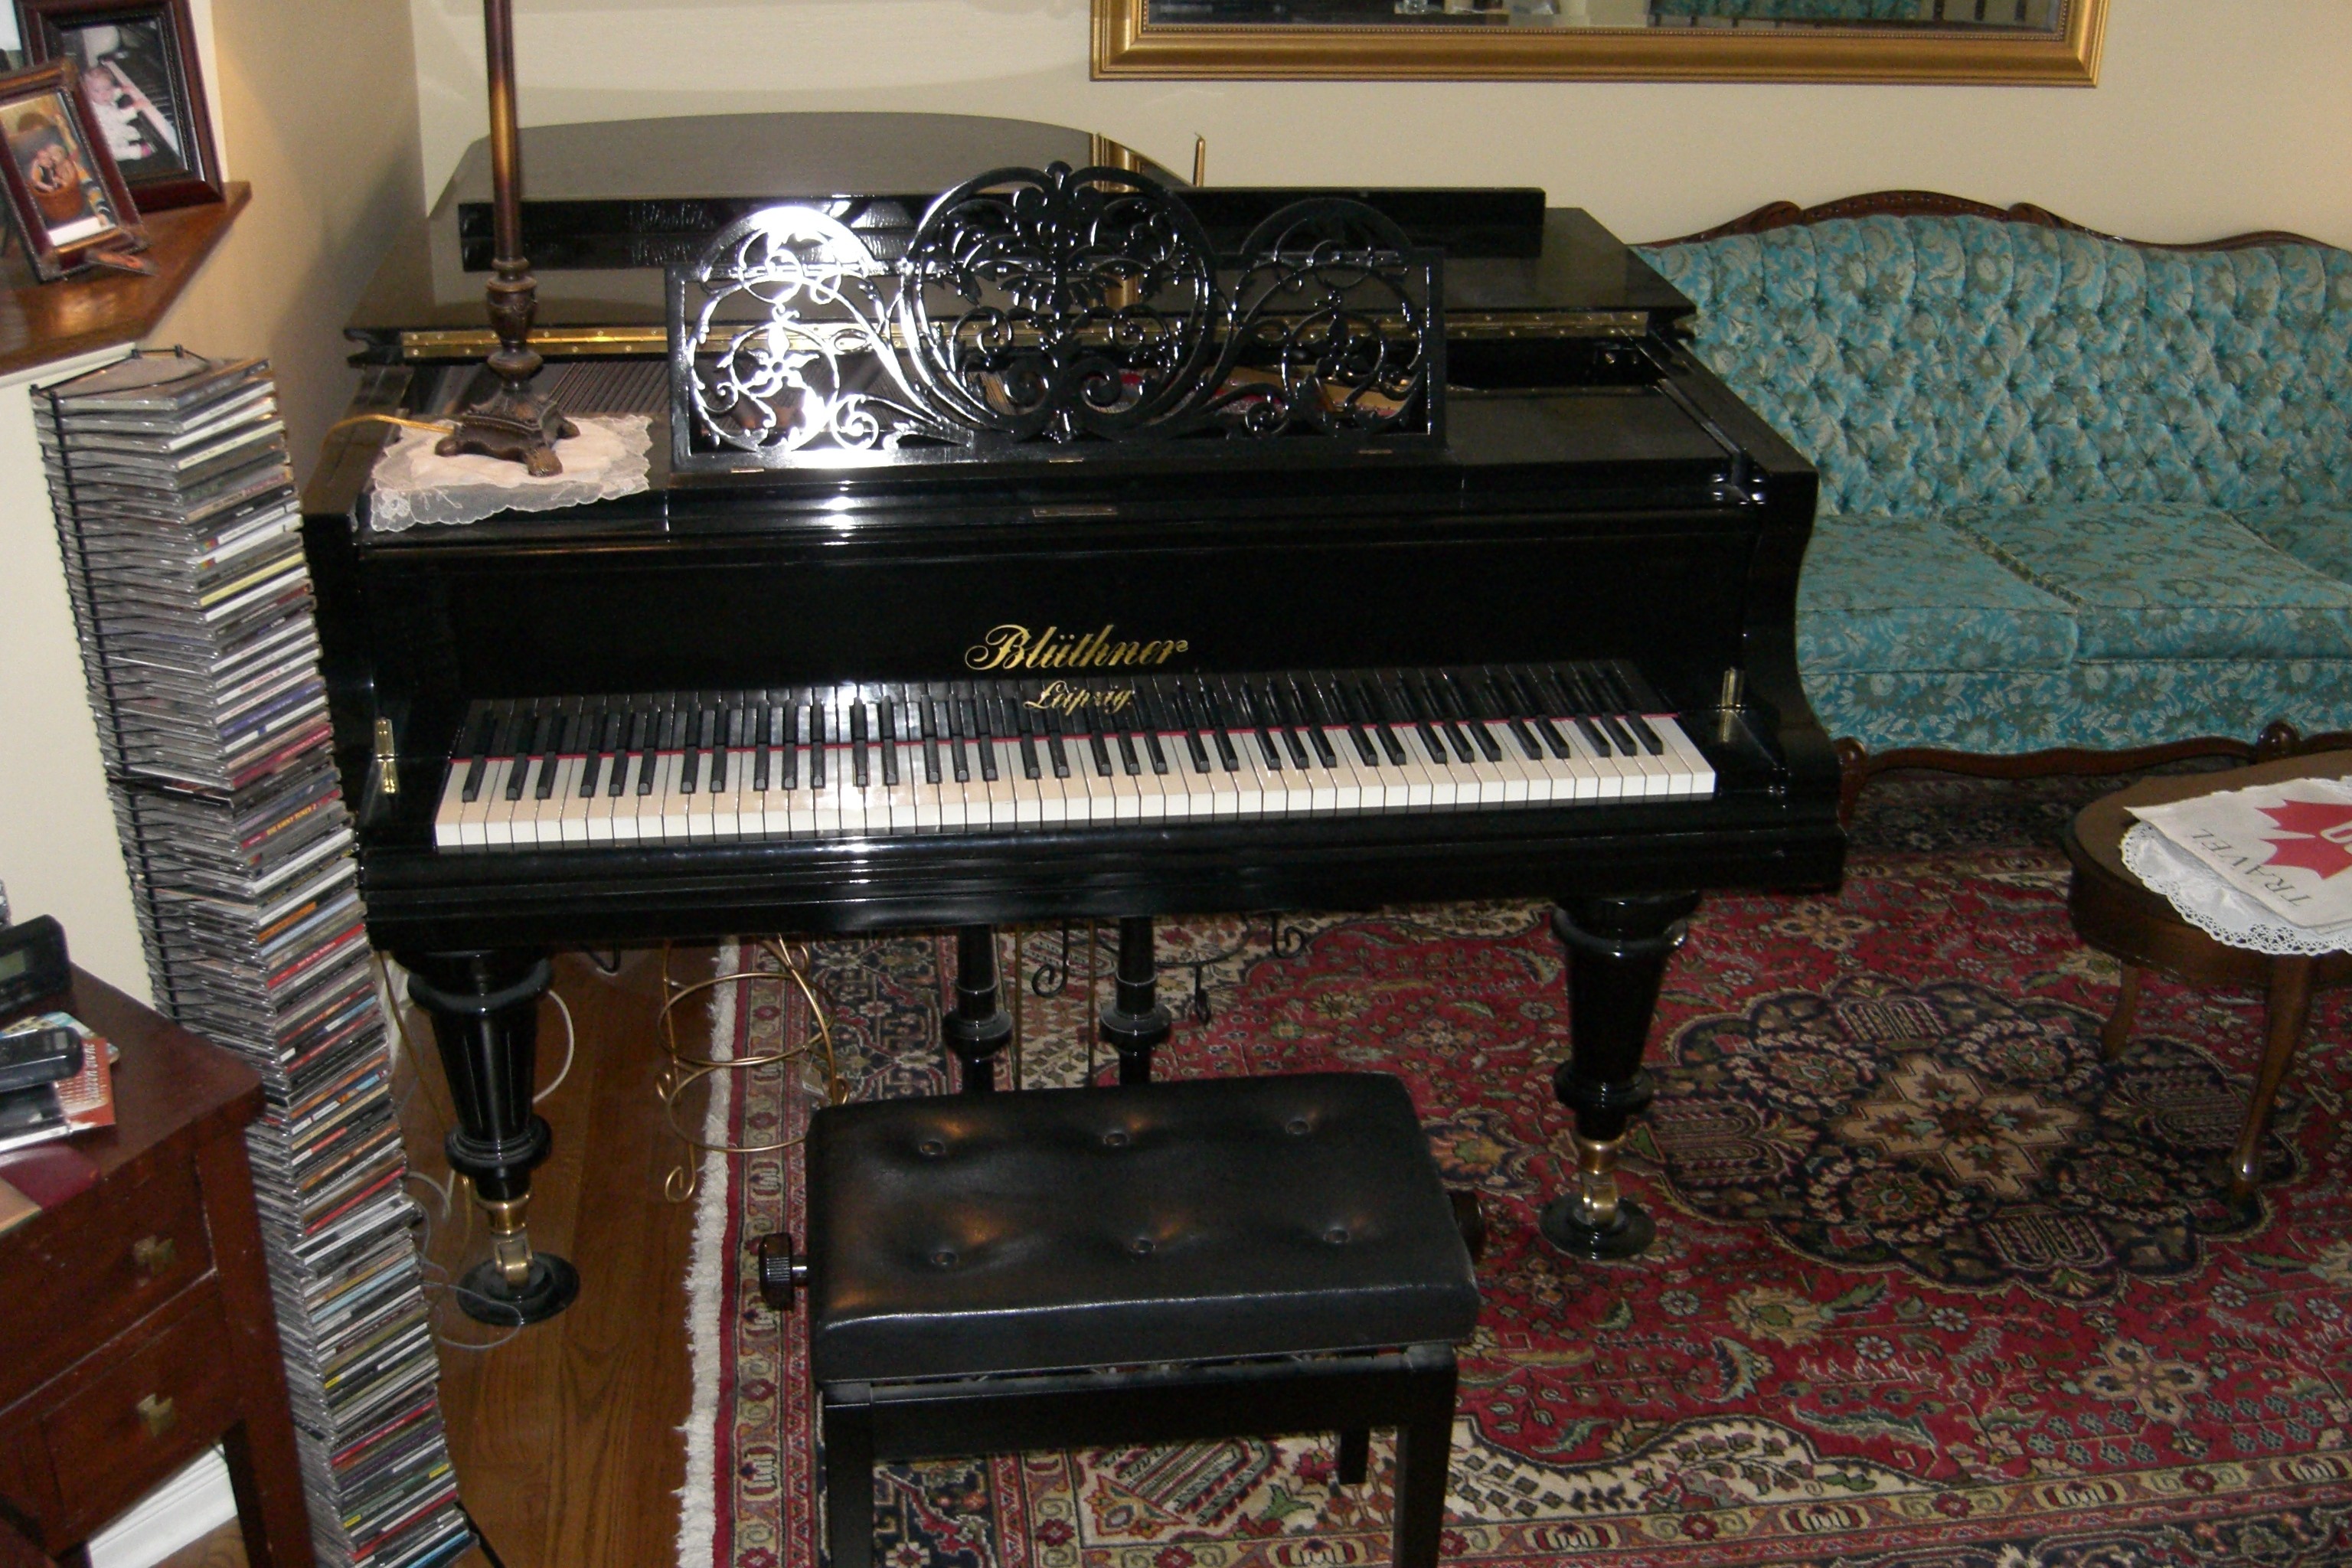 Excellent Blüthner grand piano